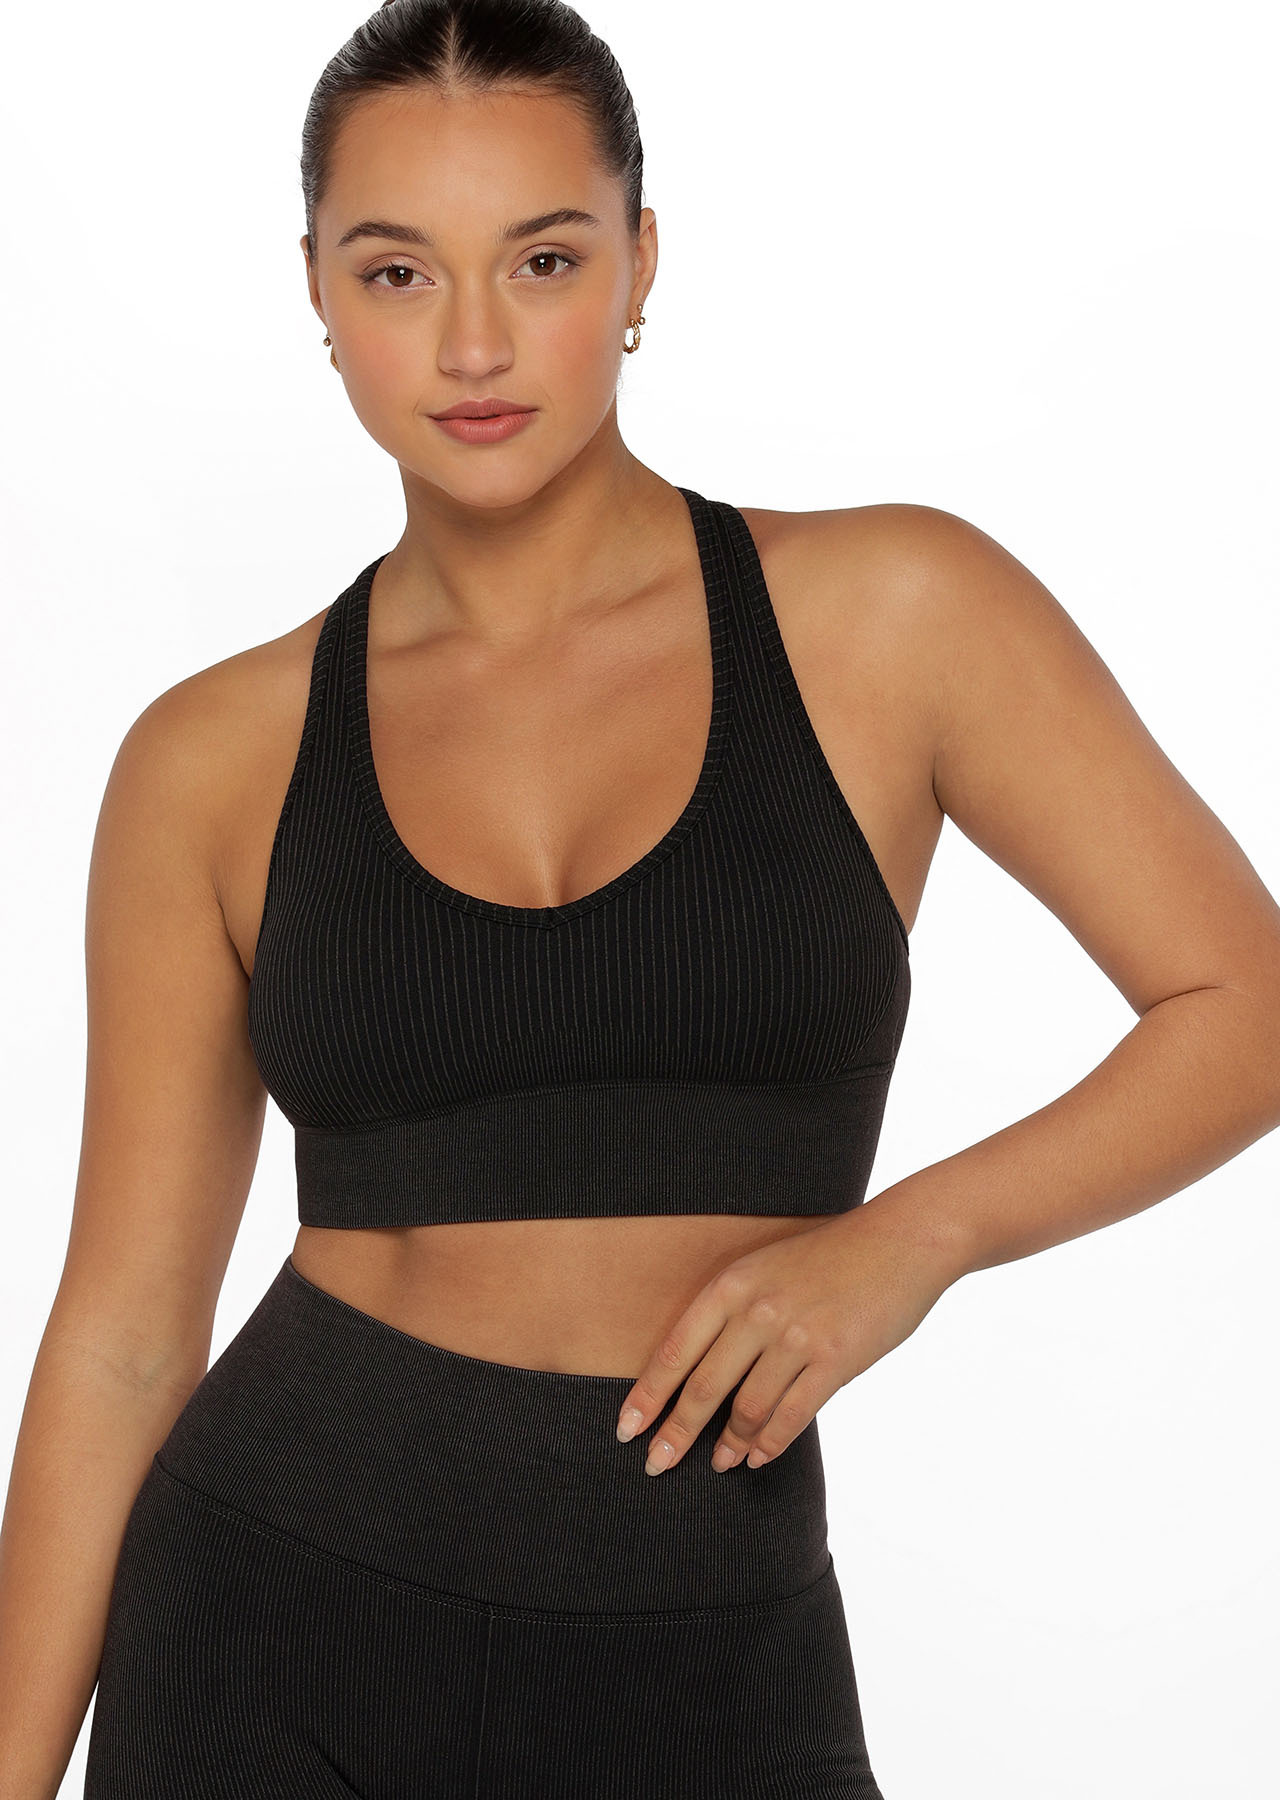 XS Nike Sports Bra (too small for me), Women's Fashion, Clothes on Carousell